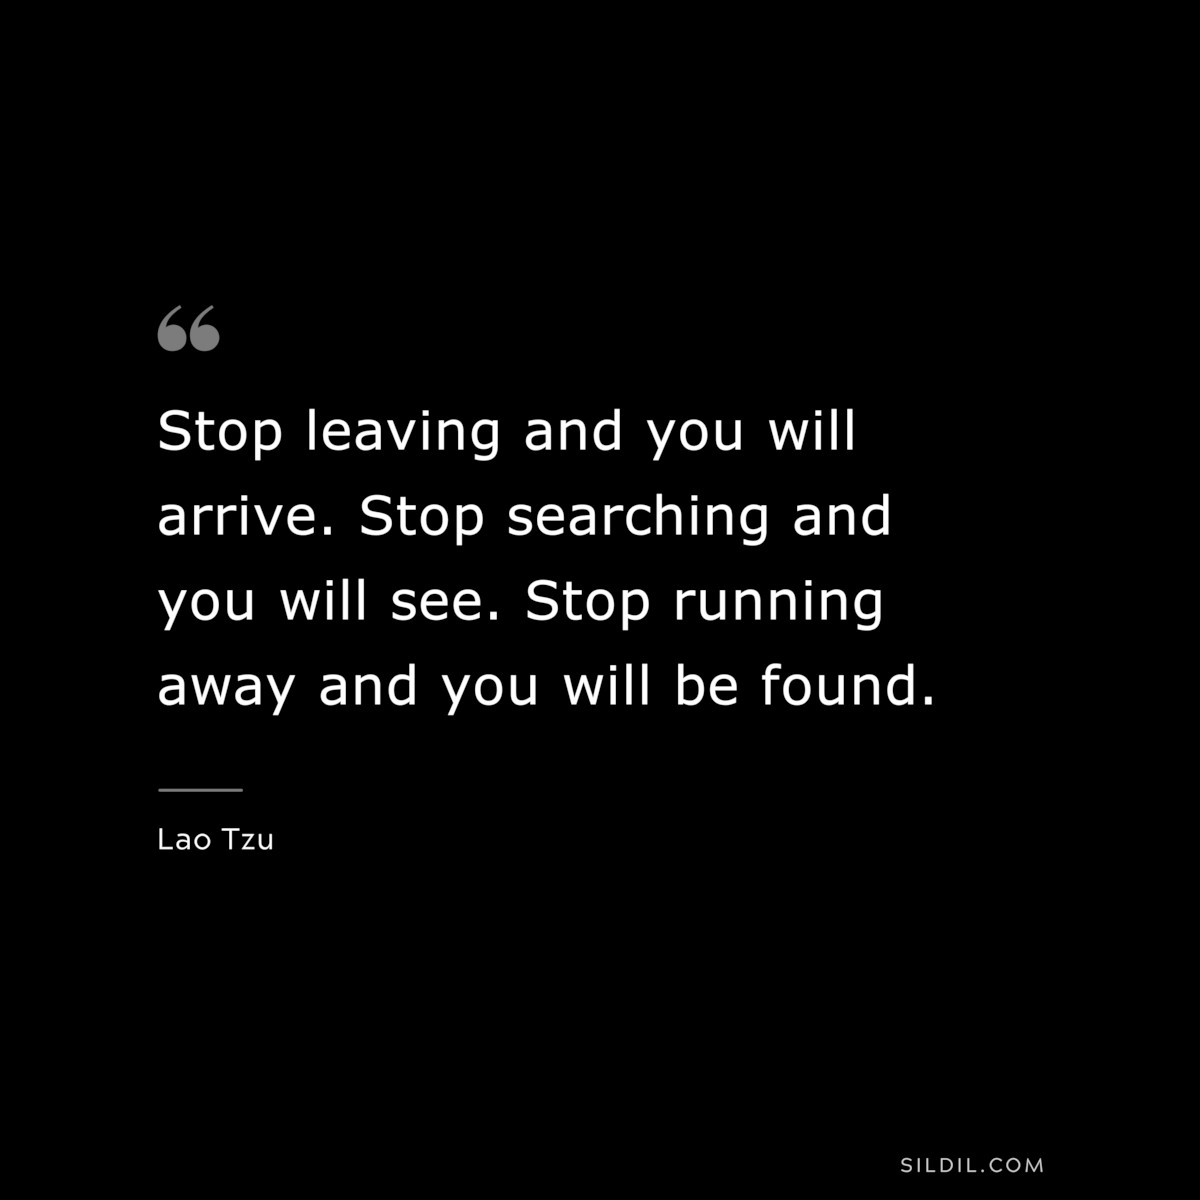 Stop leaving and you will arrive. Stop searching and you will see. Stop running away and you will be found. ― Lao Tzu